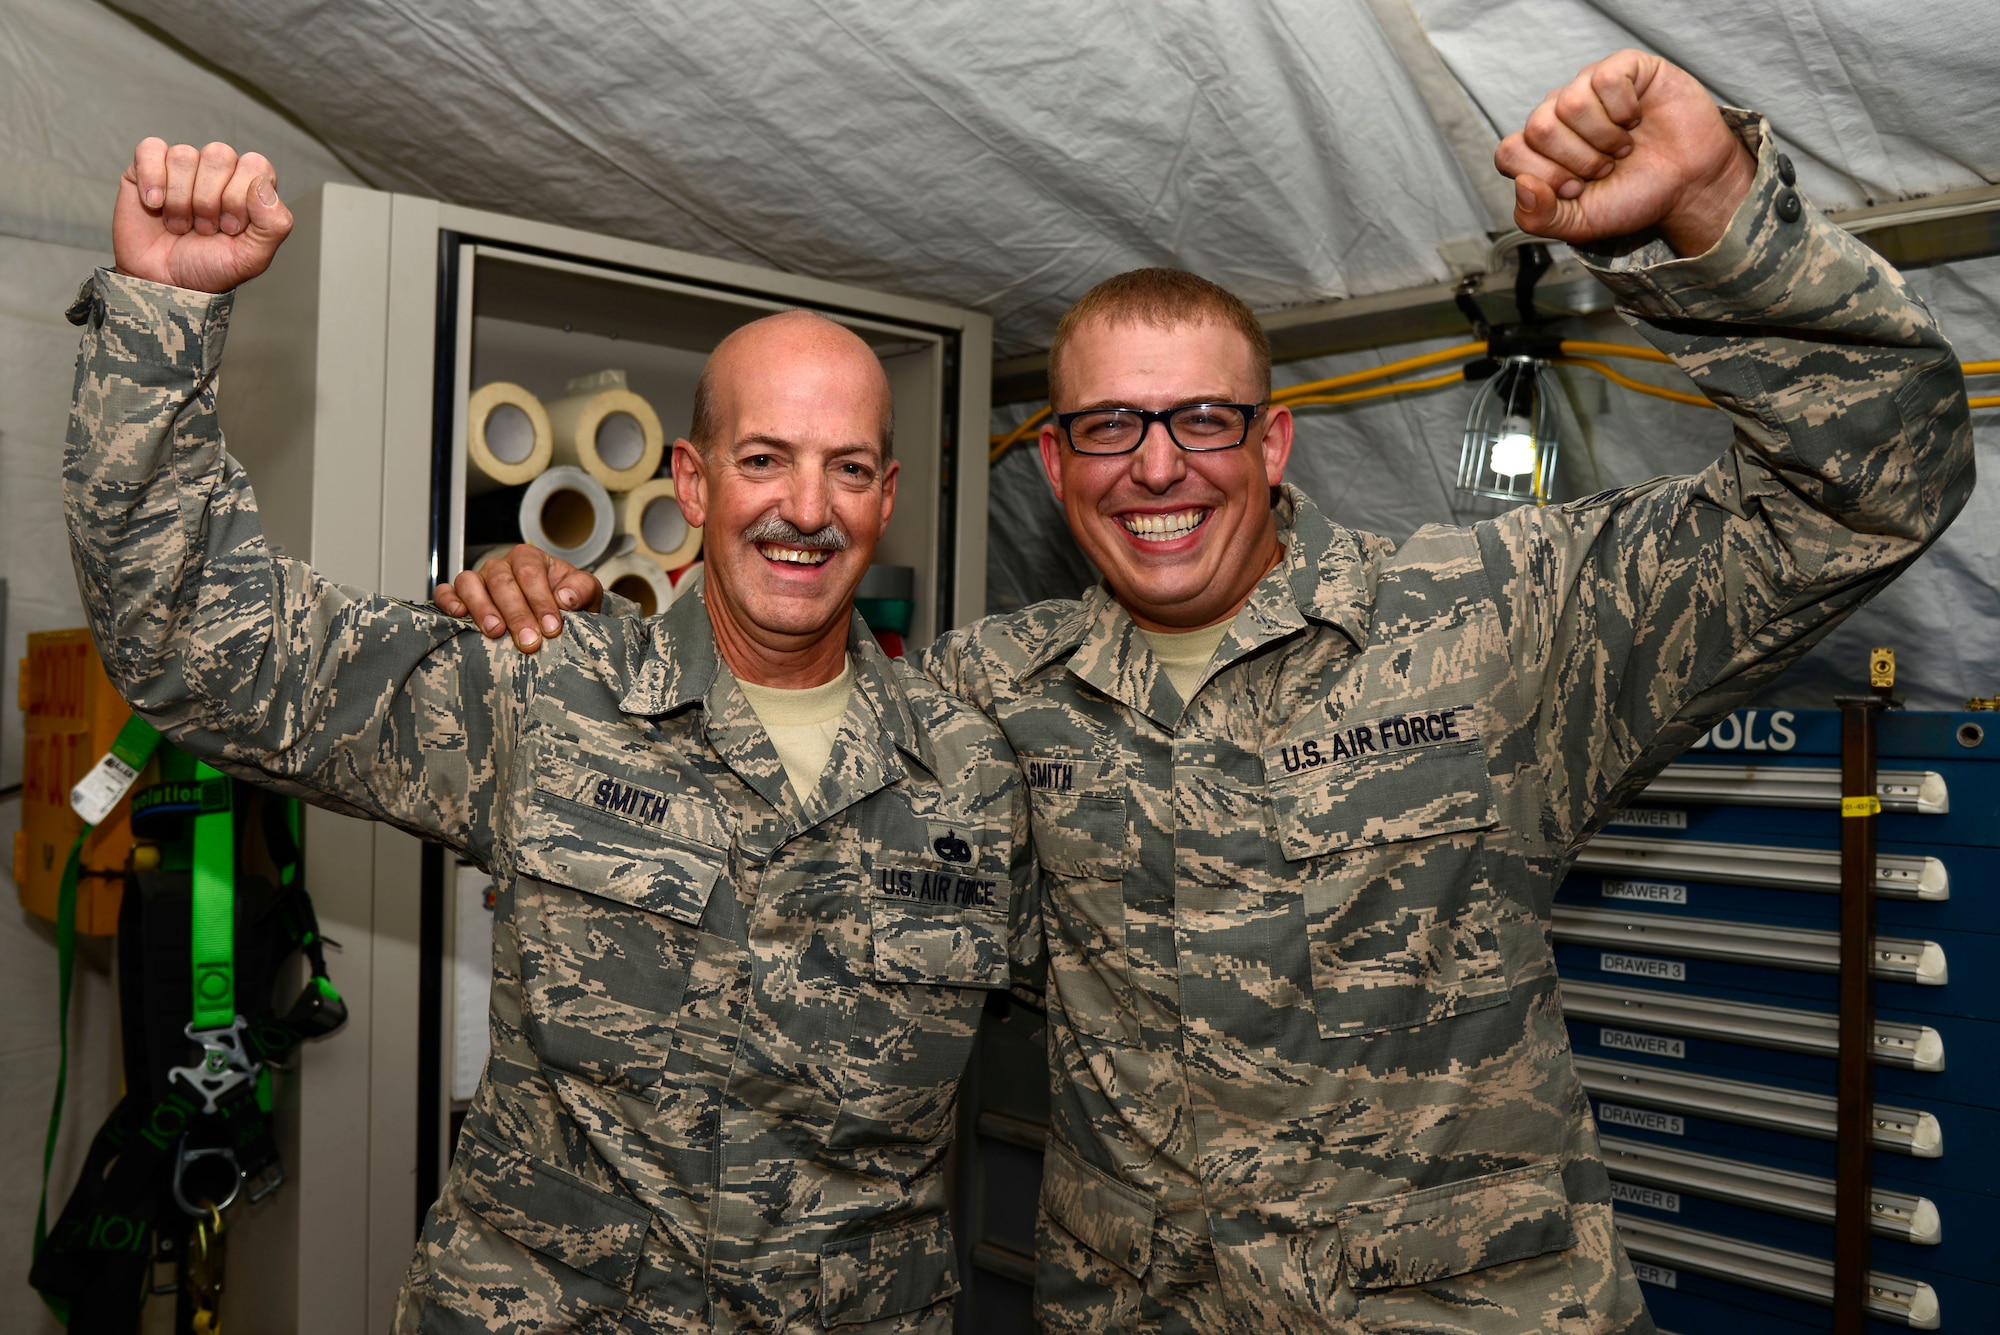 U.S. Air Force Tech. Sgt. Michial Smith, left, and Senior Airman Brandon Smith, 386th Expeditionary Aerospace Ground Equipment technicians, are deployed together as father and son at an undisclosed location in Southwest Asia, June 11, 2015. The Smith duo is stationed at Pittsburgh International Airport Air Reserve Station in Pennsylvania. (U.S. Air Force photo by Senior Airman Racheal E. Watson/Released)